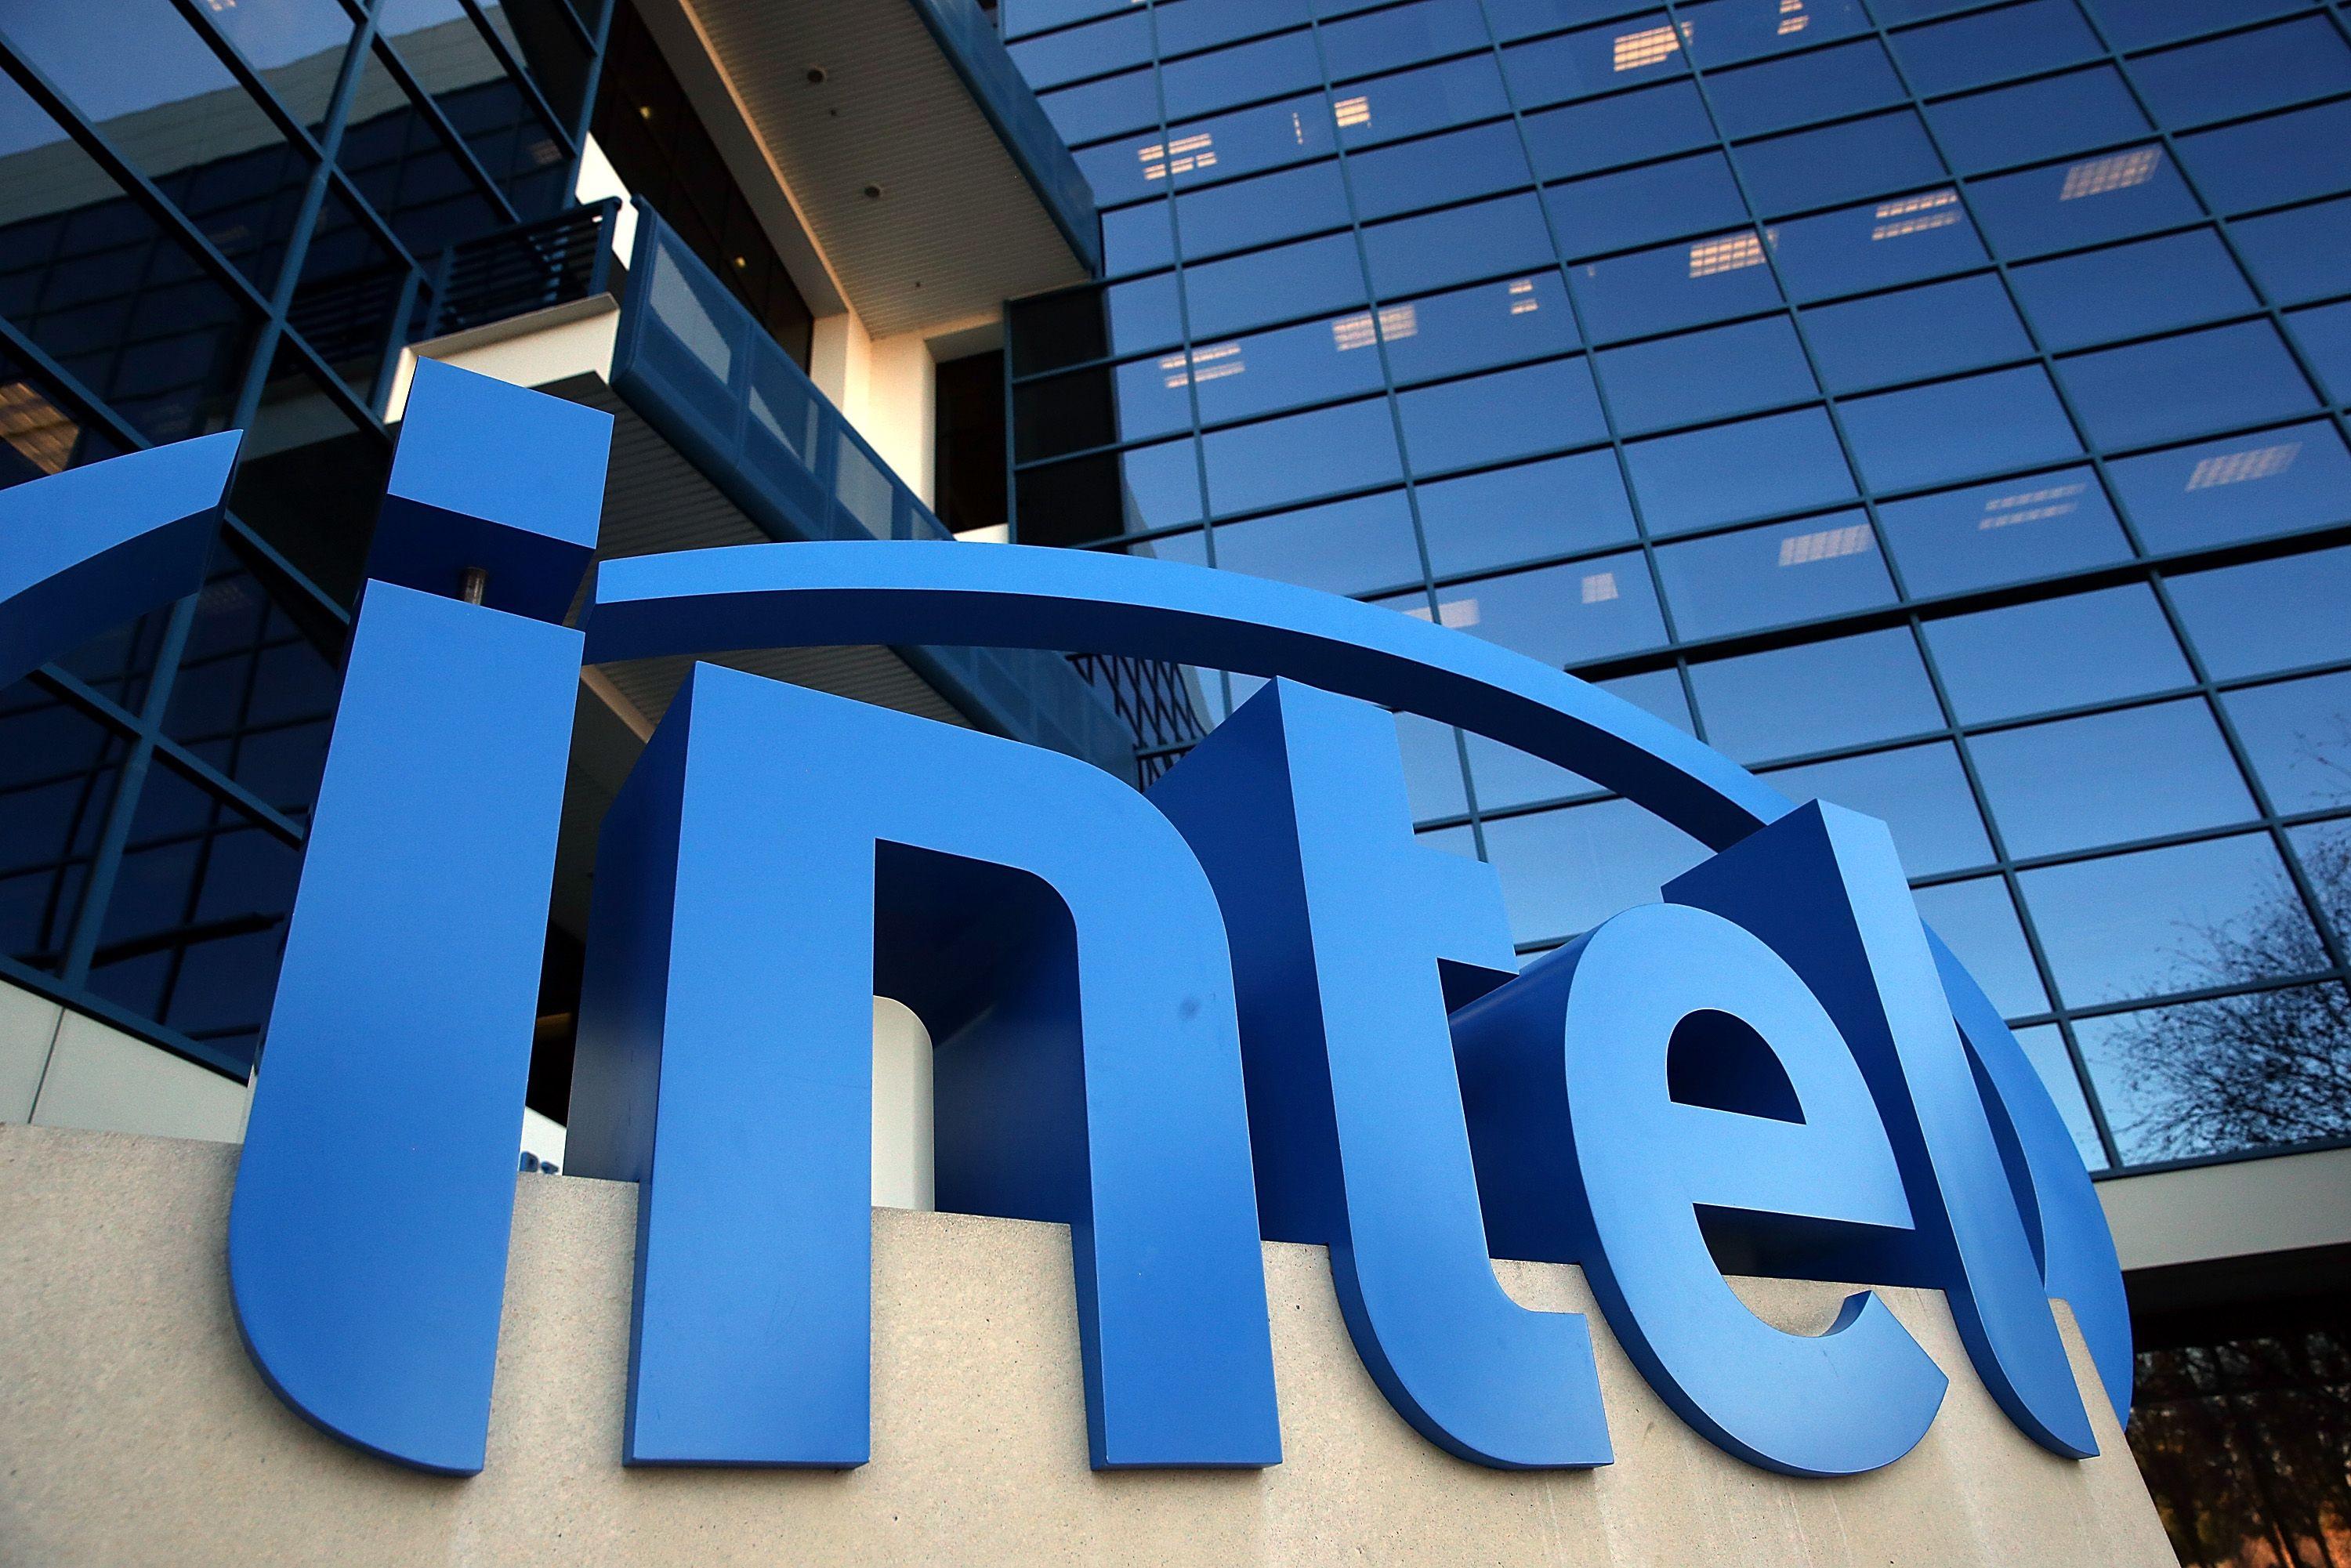 Intel Corp Logo - Intel Corp Tells Customers to Halt Patching With Faulty Chips